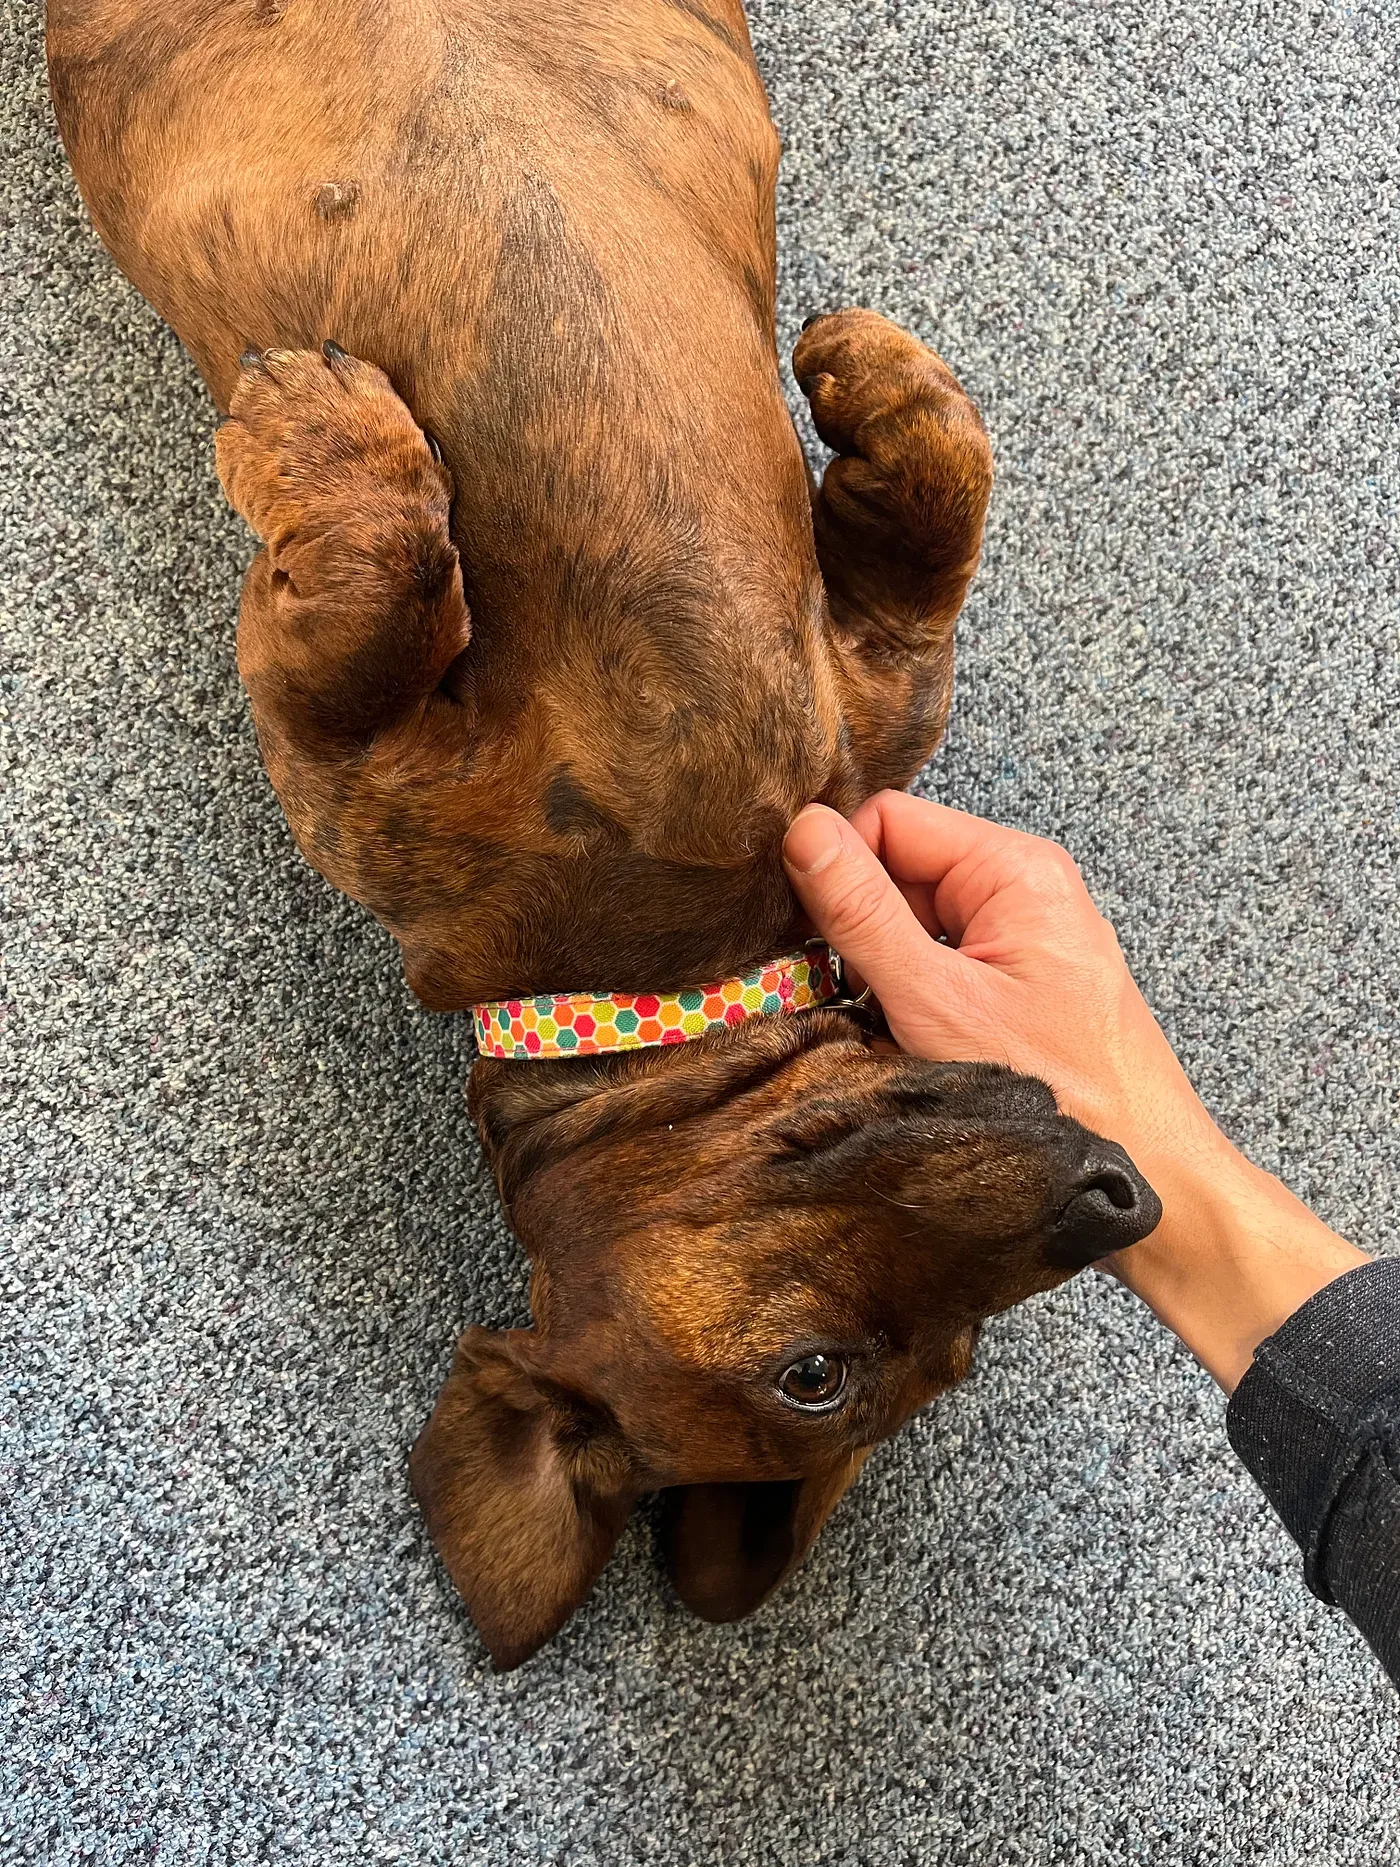 Angie — one of our office dogs